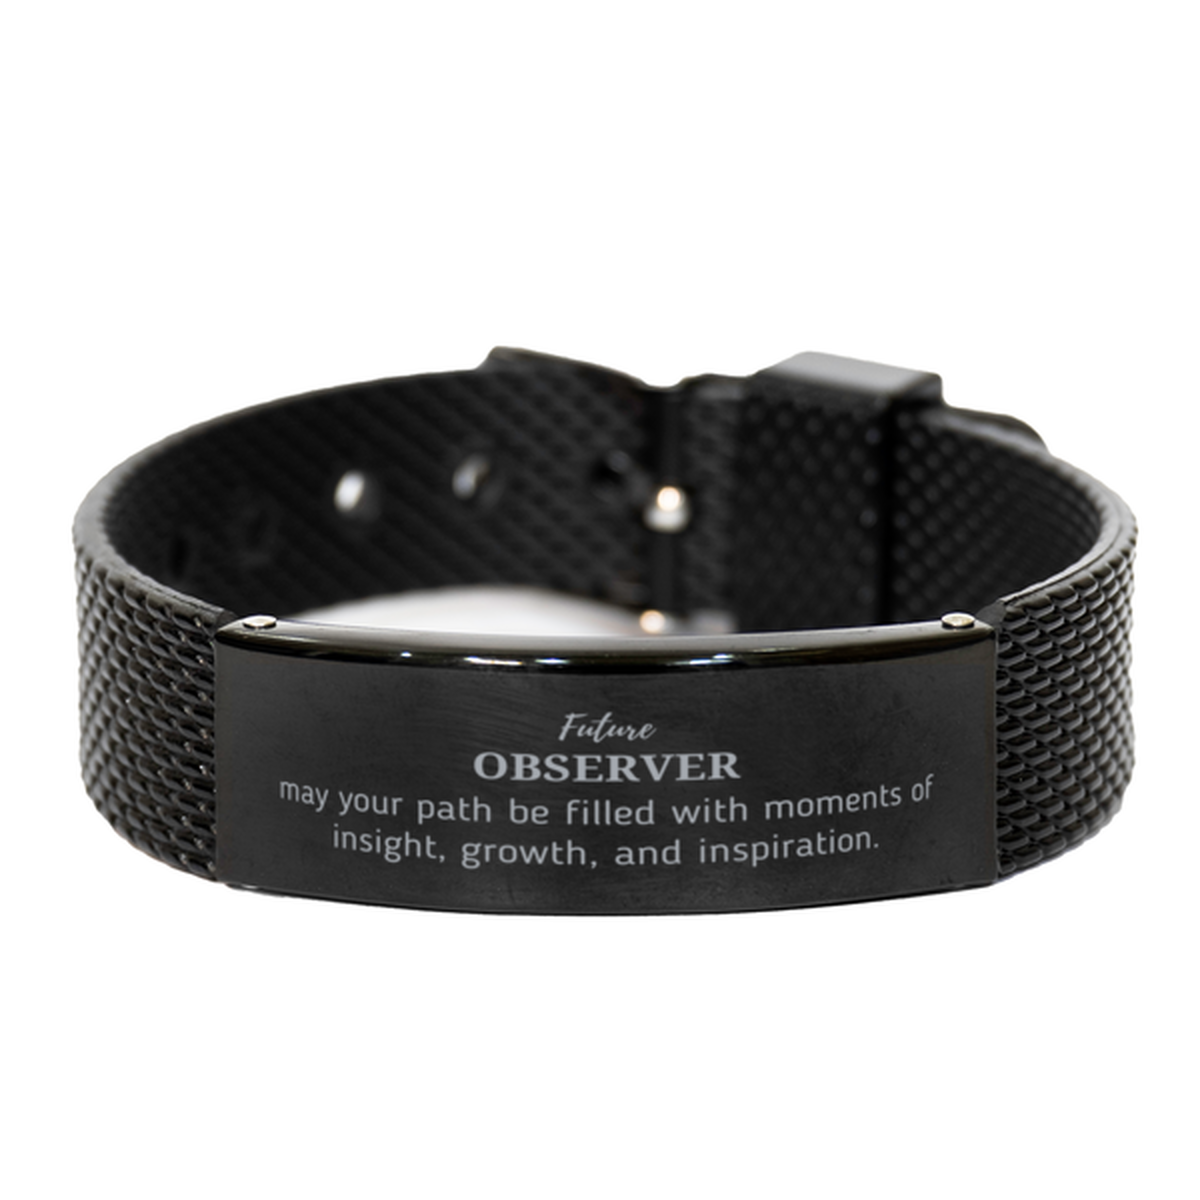 Future Observer Gifts, May your path be filled with moments of insight, Graduation Gifts for New Observer, Christmas Unique Black Shark Mesh Bracelet For Men, Women, Friends